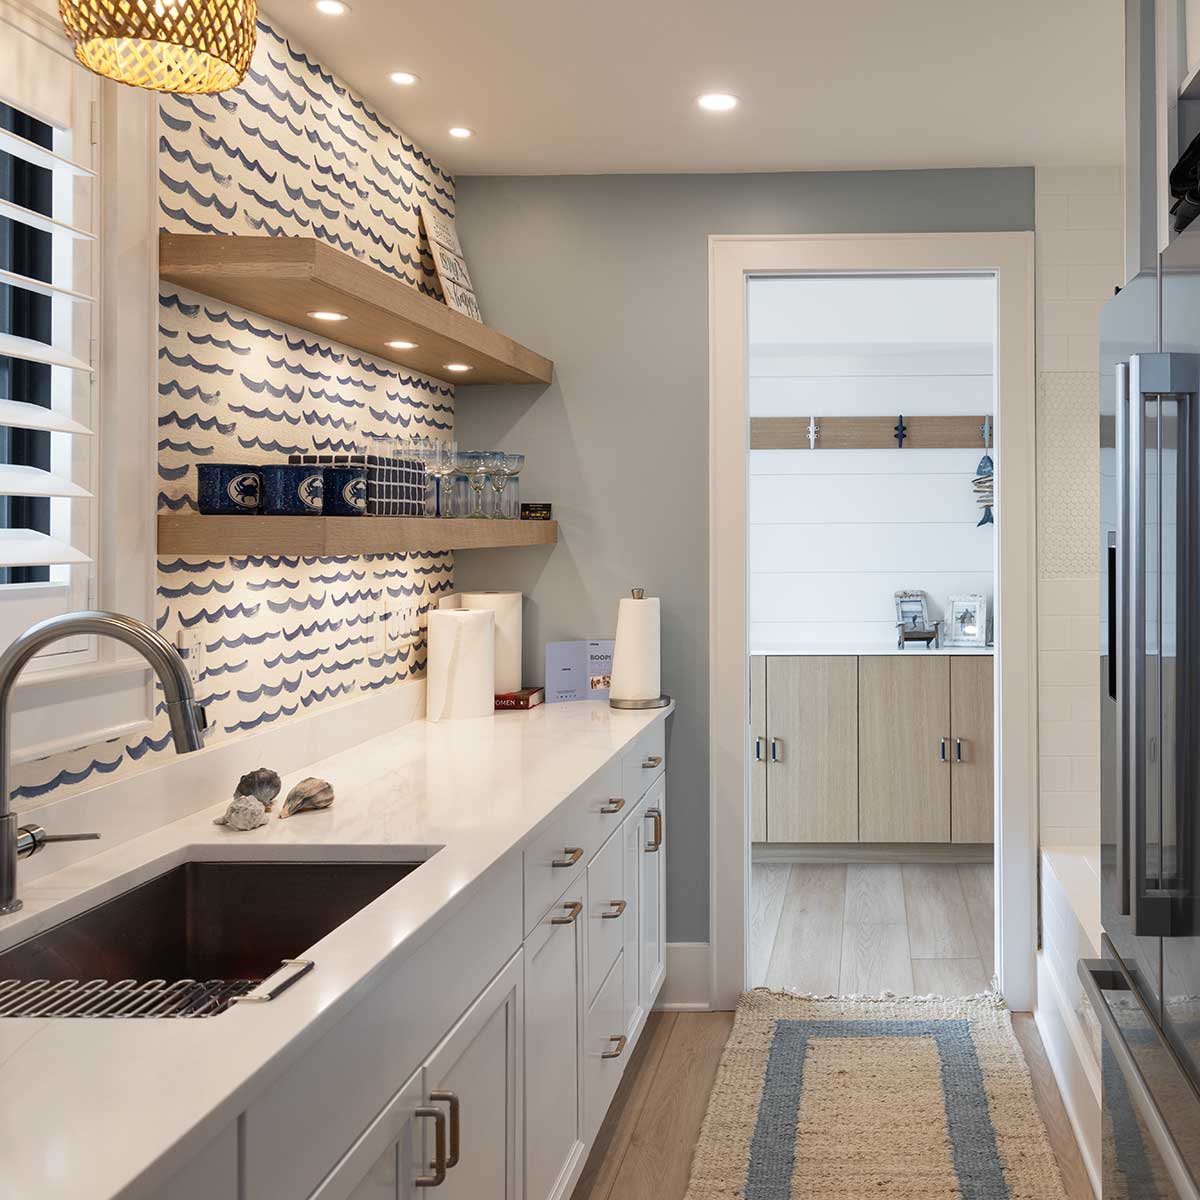 A contemporary laundry room with wave wallpaper, white countertops and lower cabinets and open shelving.